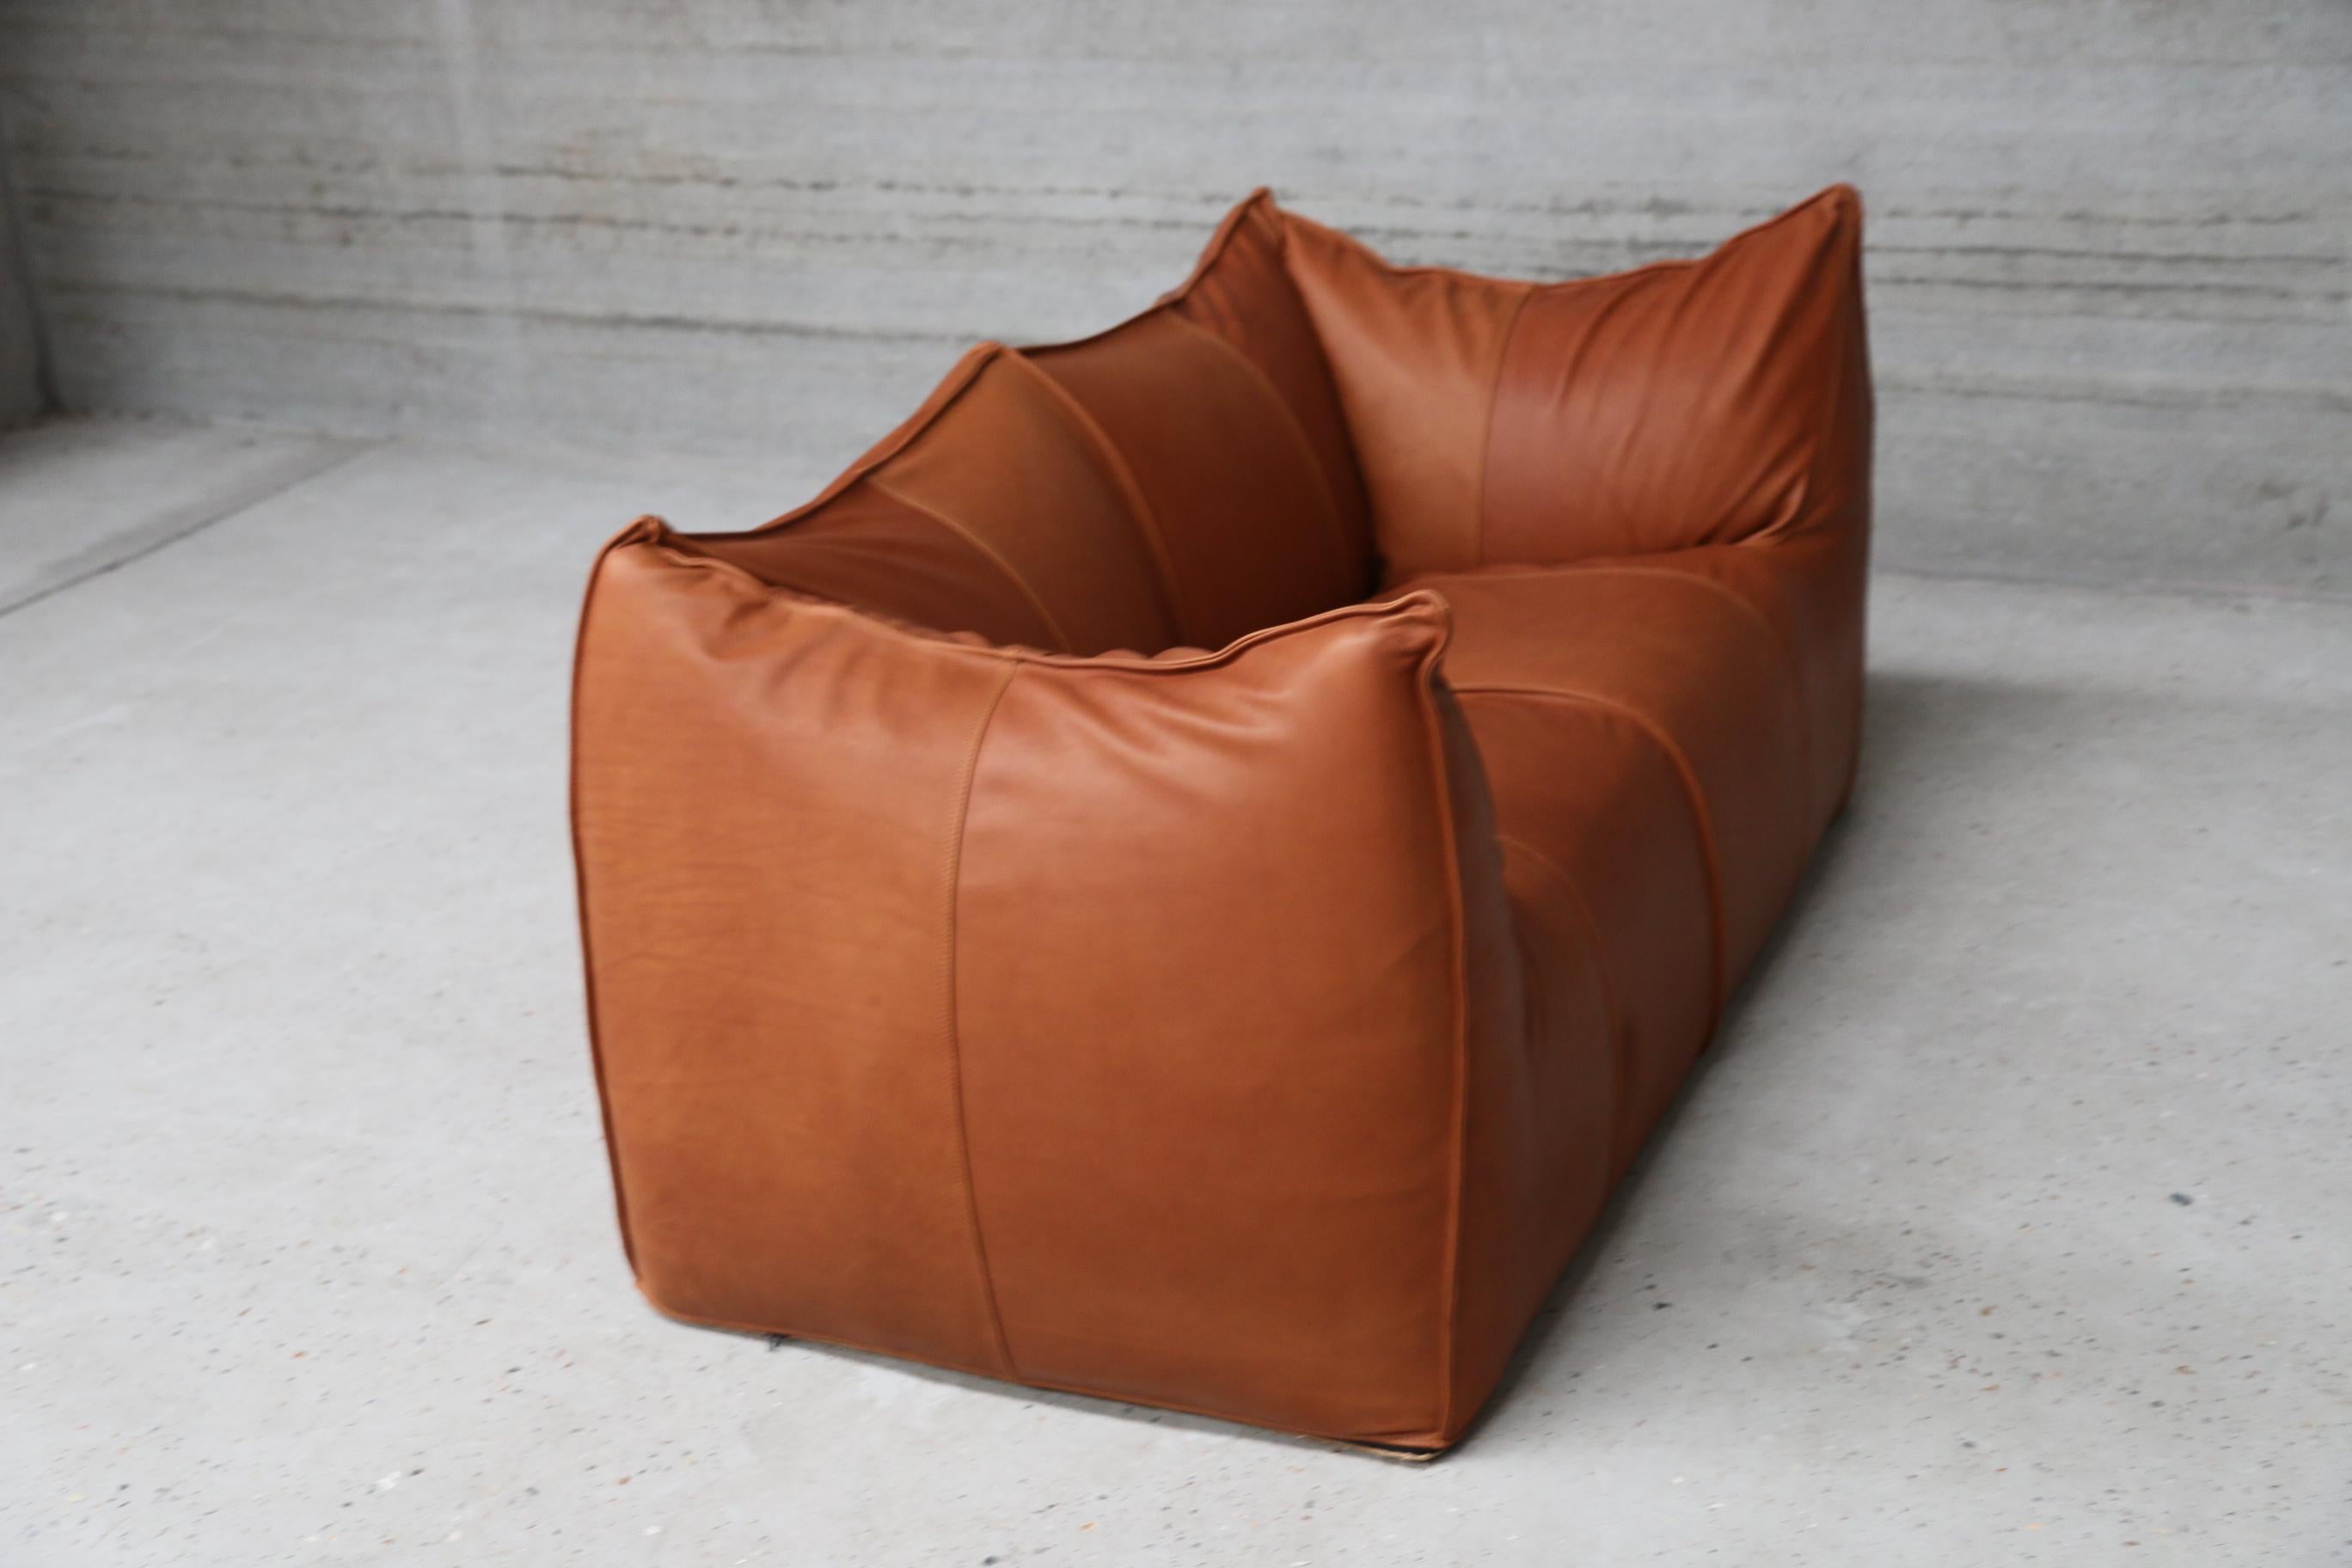 Vintage Mario Bellini Bambole Loveseat for B&B, Italia, 1970, Cognac Leather In Excellent Condition For Sale In Ostend, BE